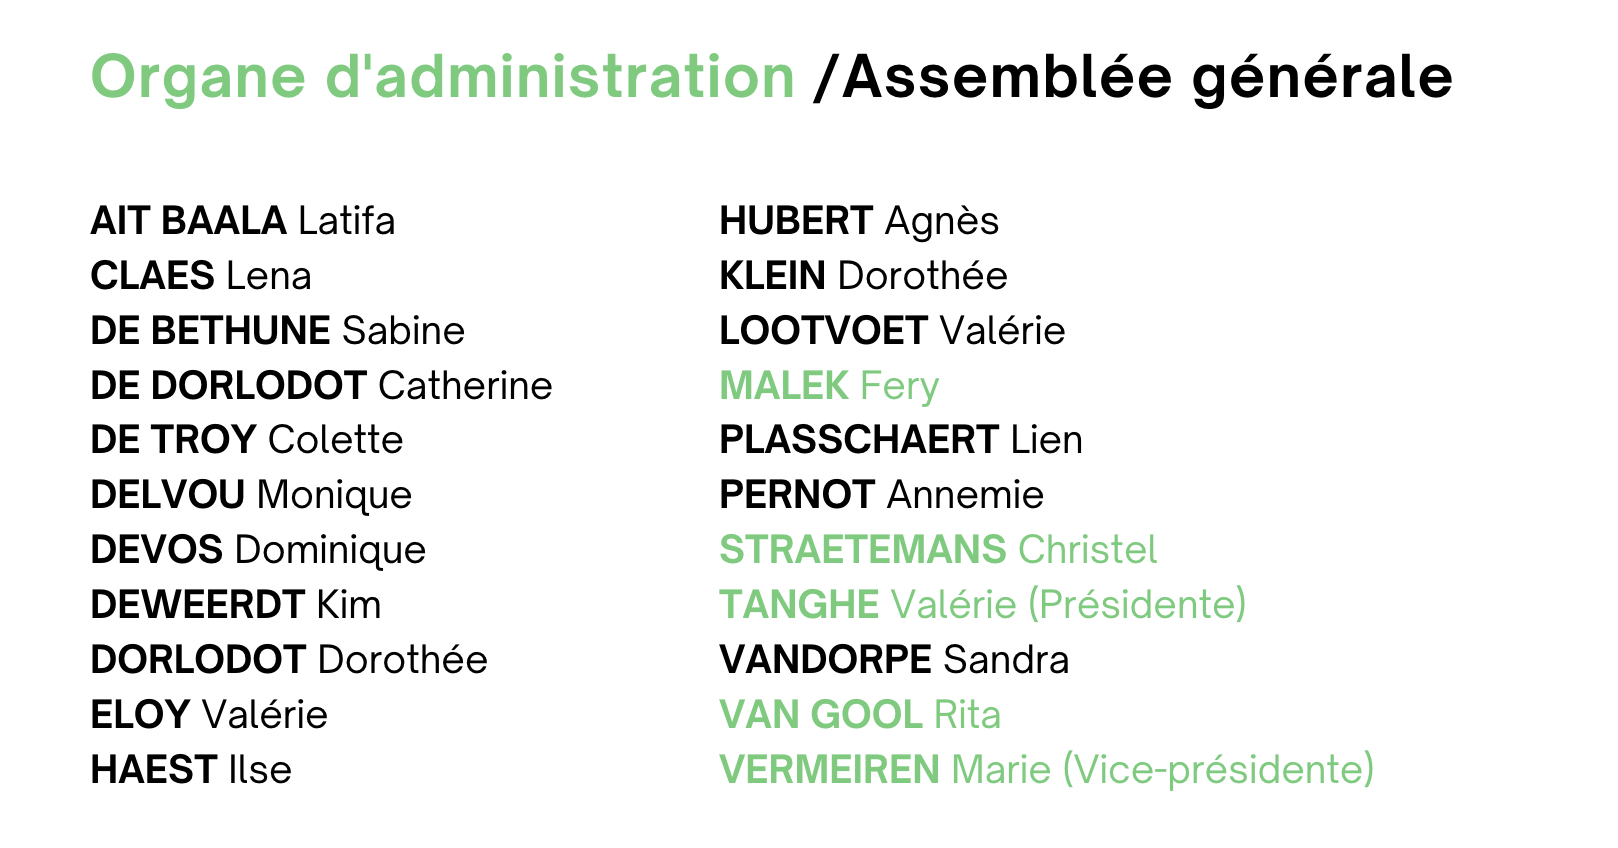 Organes d'administratrion